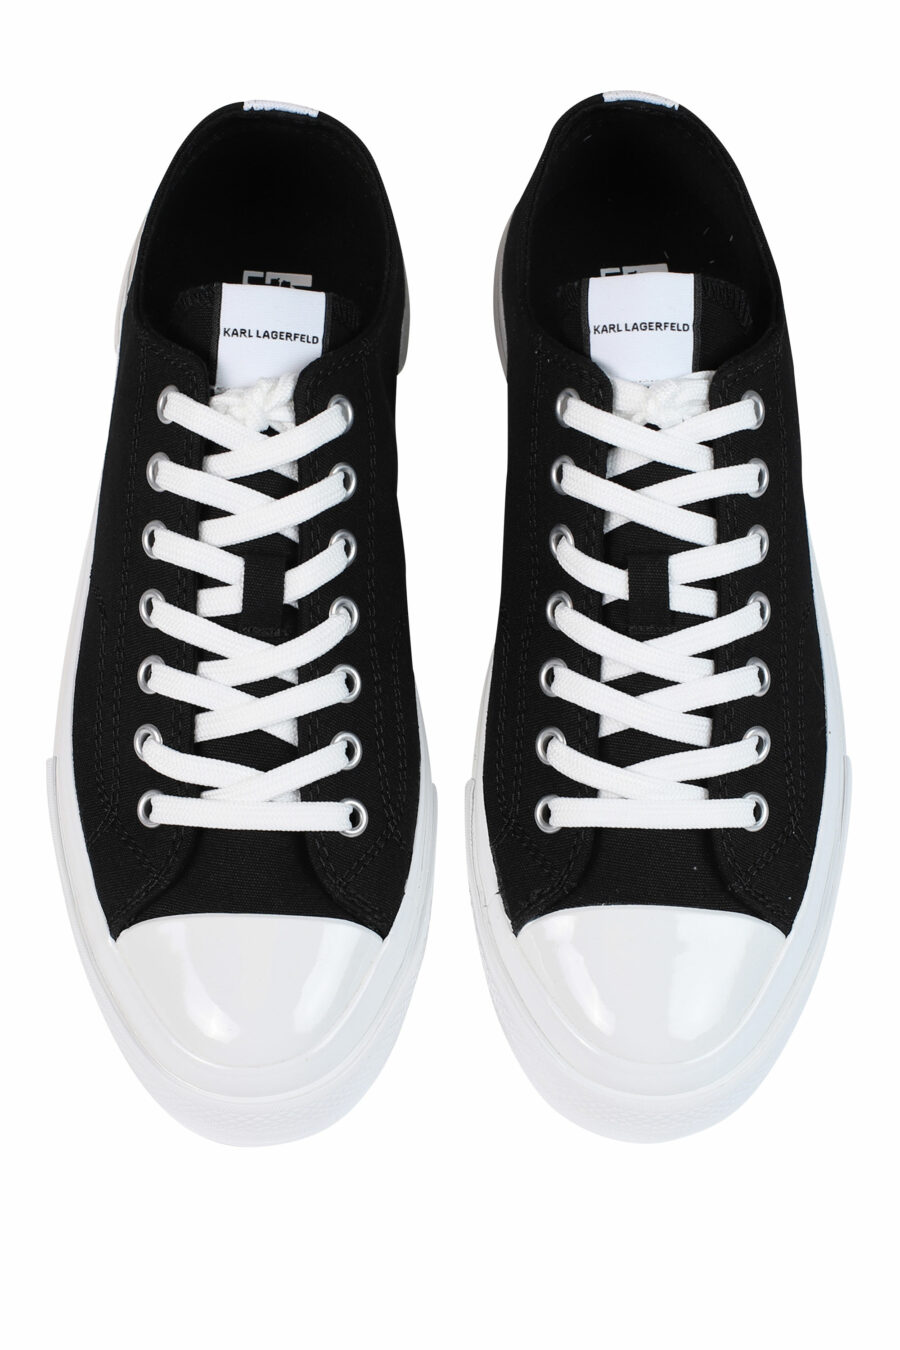 Black trainers with "karl" logo and white sole - 5059529249655 5